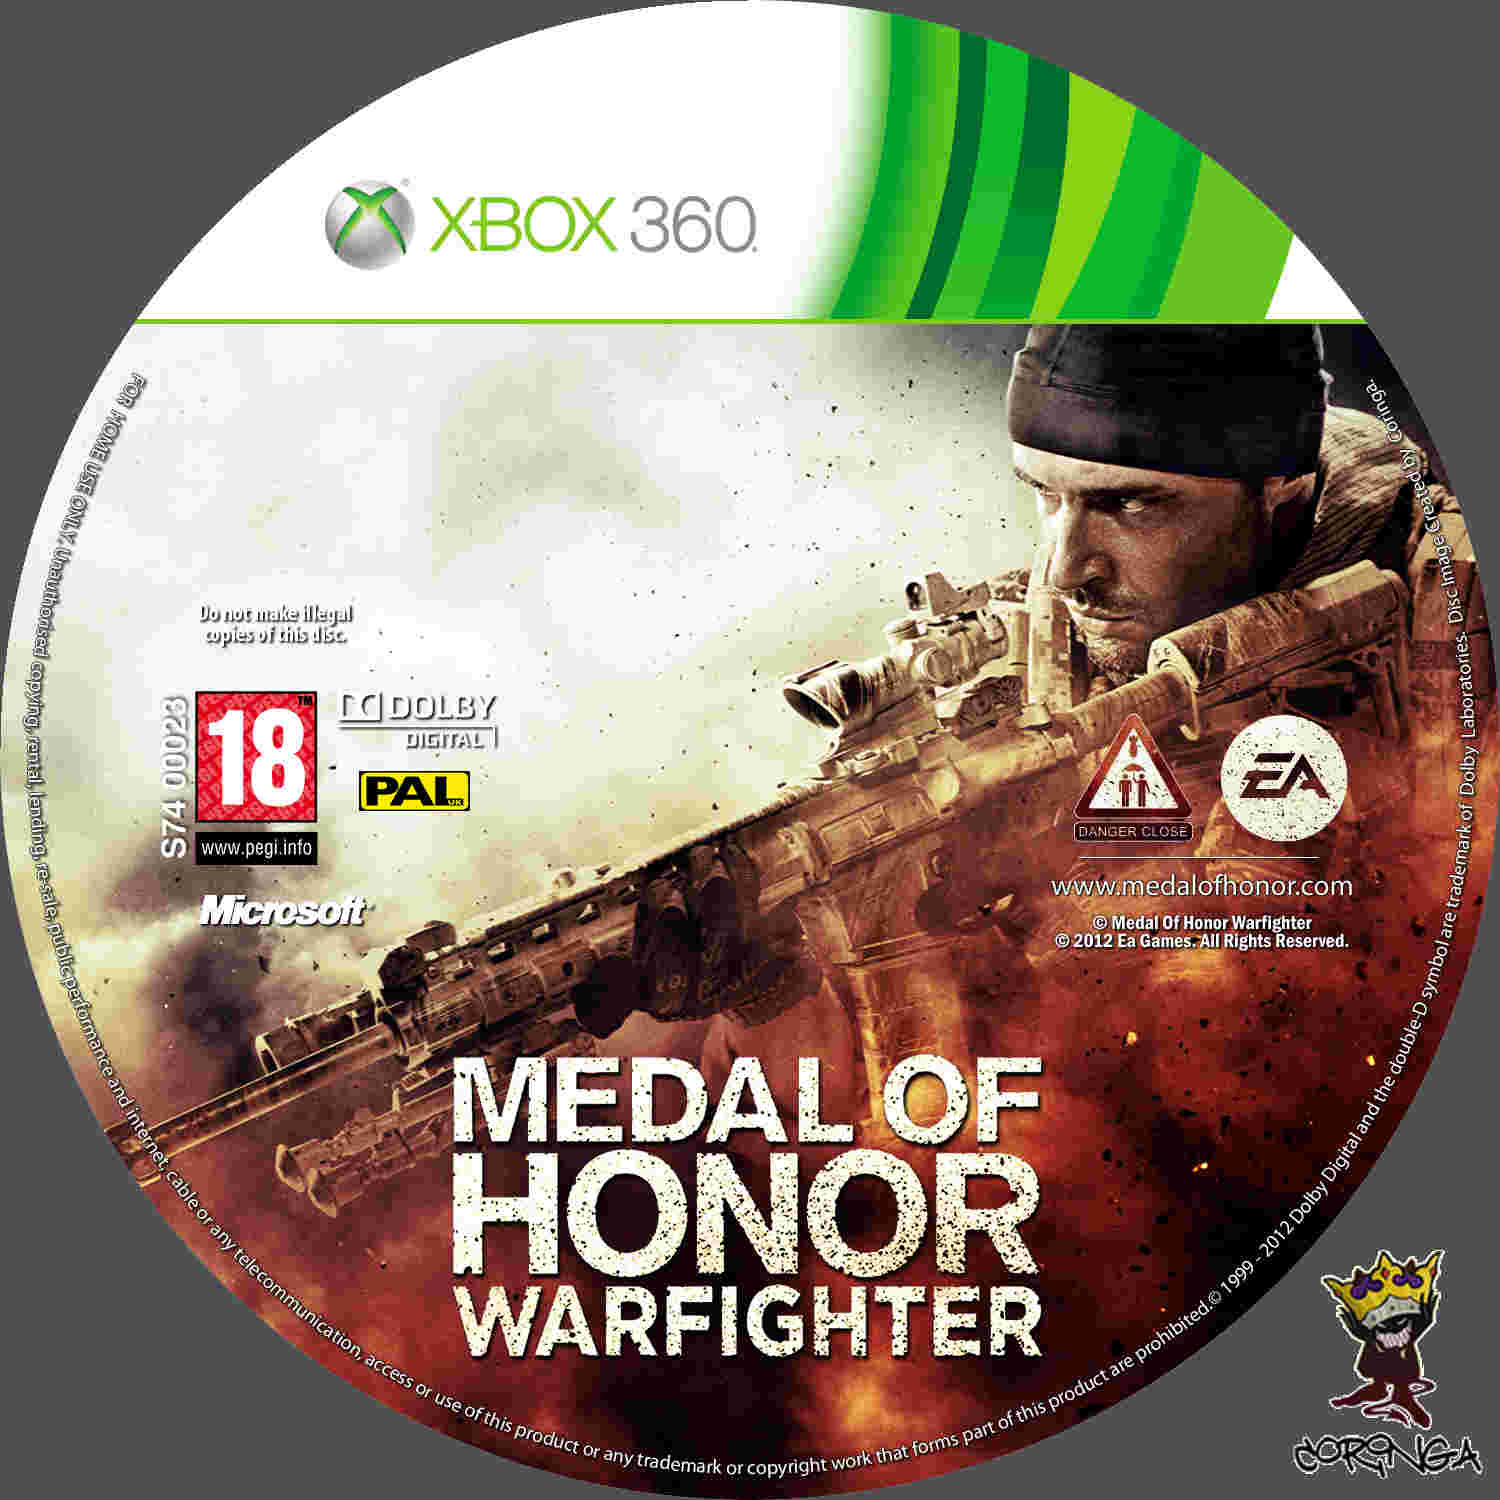 Medal of honor 360. Medal of Honor Xbox 360 обложка. Medal of Honor ps3 обложка. Medal of Honor Warfighter Xbox 360. Xbox 360 обложка диска Medal of Honor Warfighter.